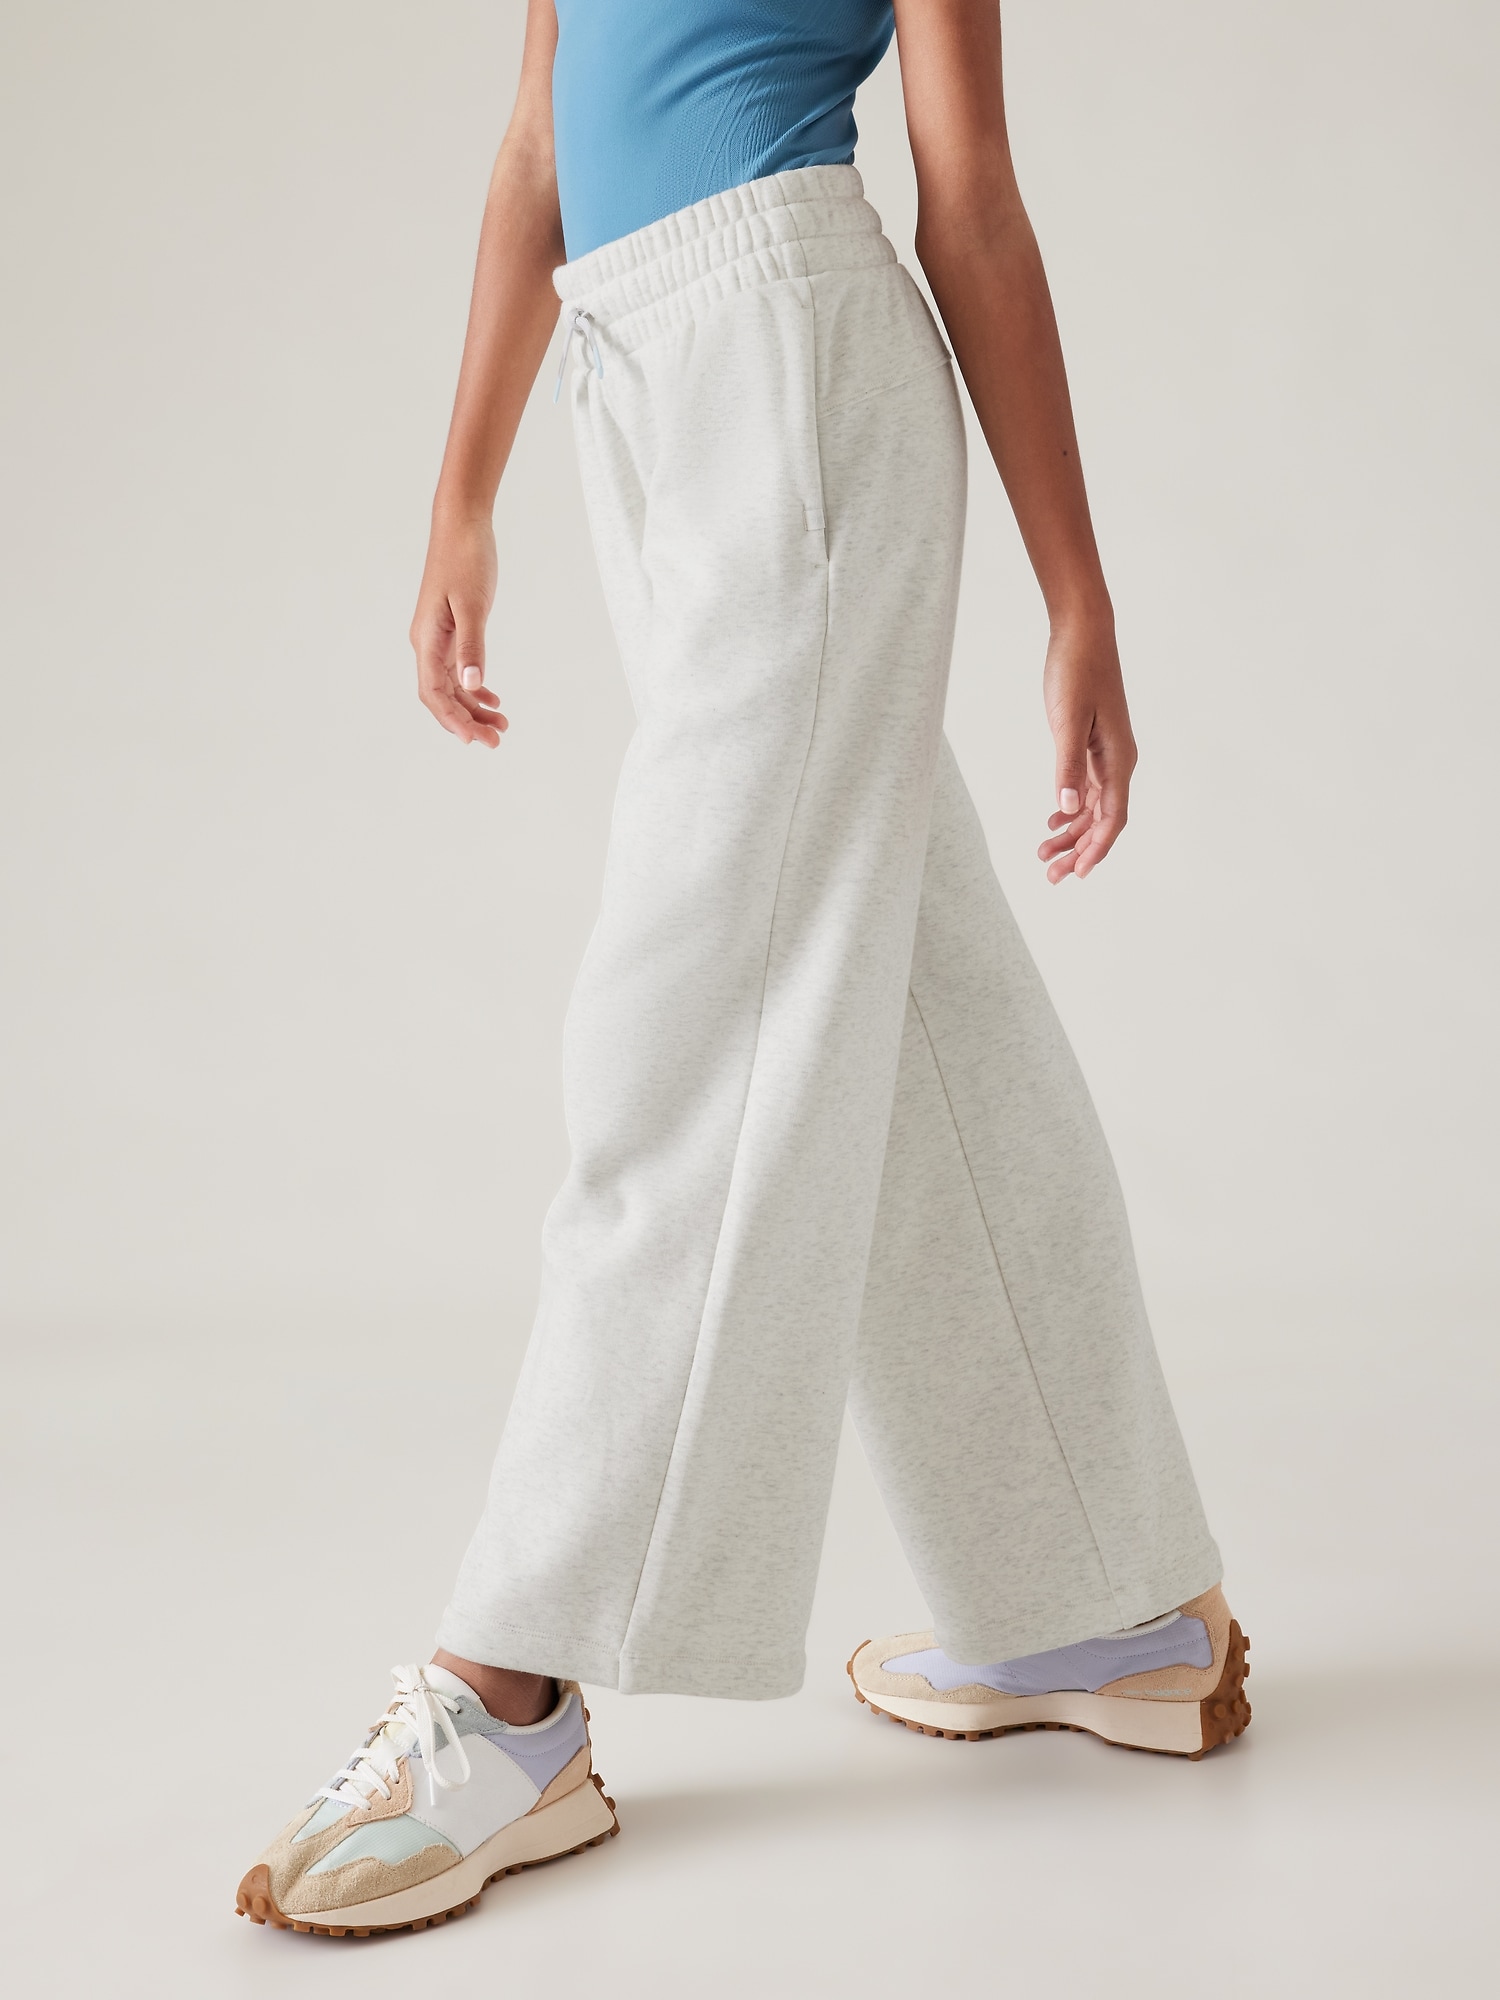 Women's Athleta Wide-leg and palazzo pants from $79